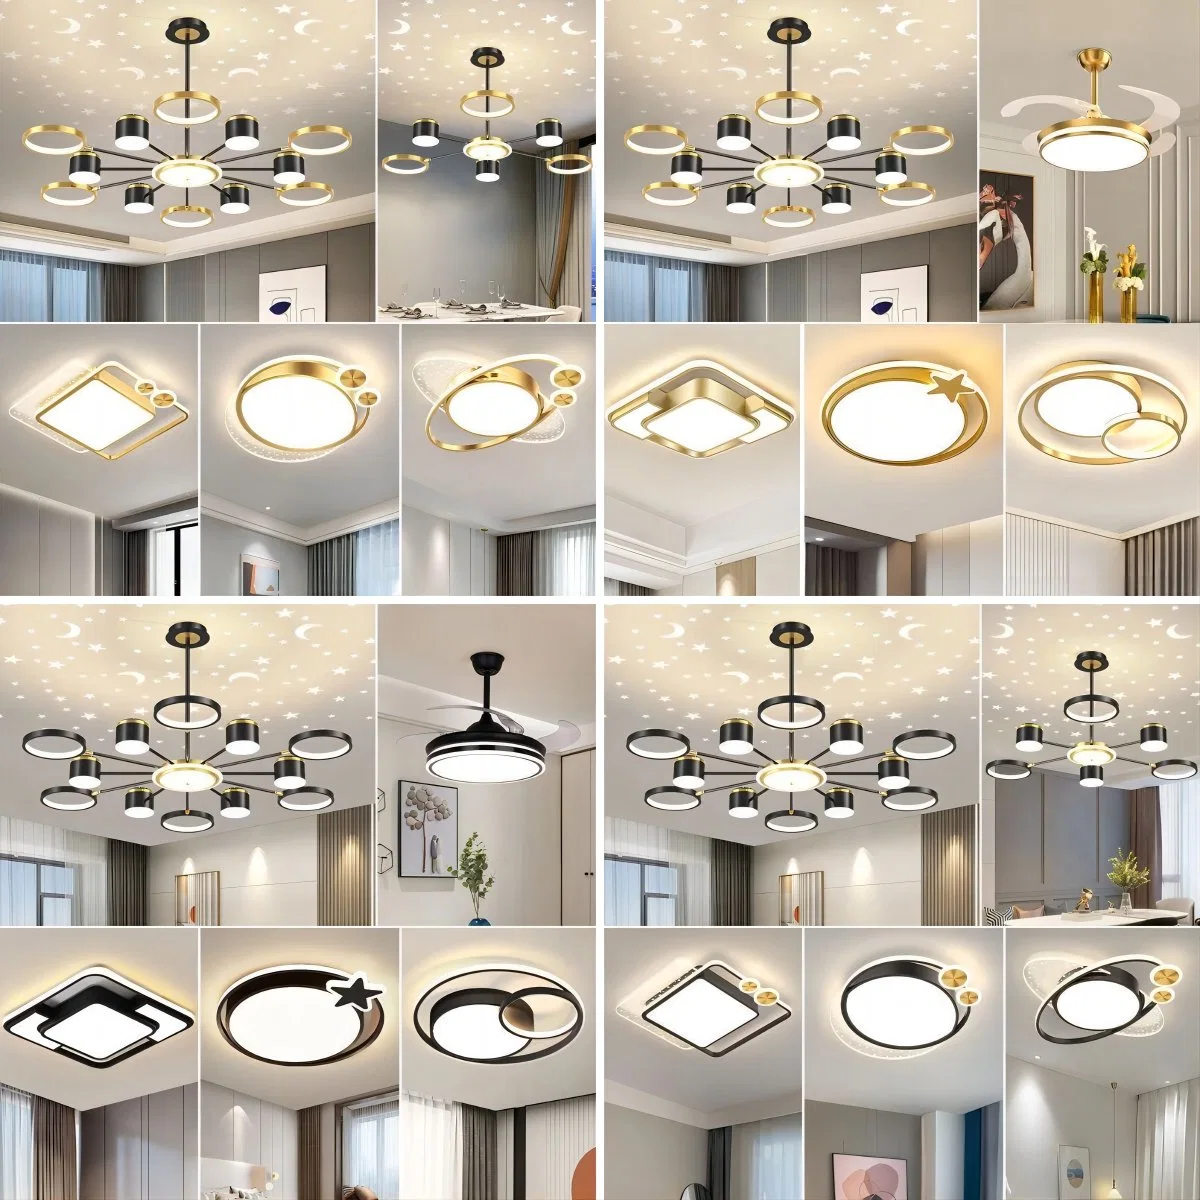 Wholesale Price Guzhen Zhongshan Interior Lighting Clear Black Hotel Project Modern Design LED Glass Customized Crystal Chandelier Lamp Manufacturer in China